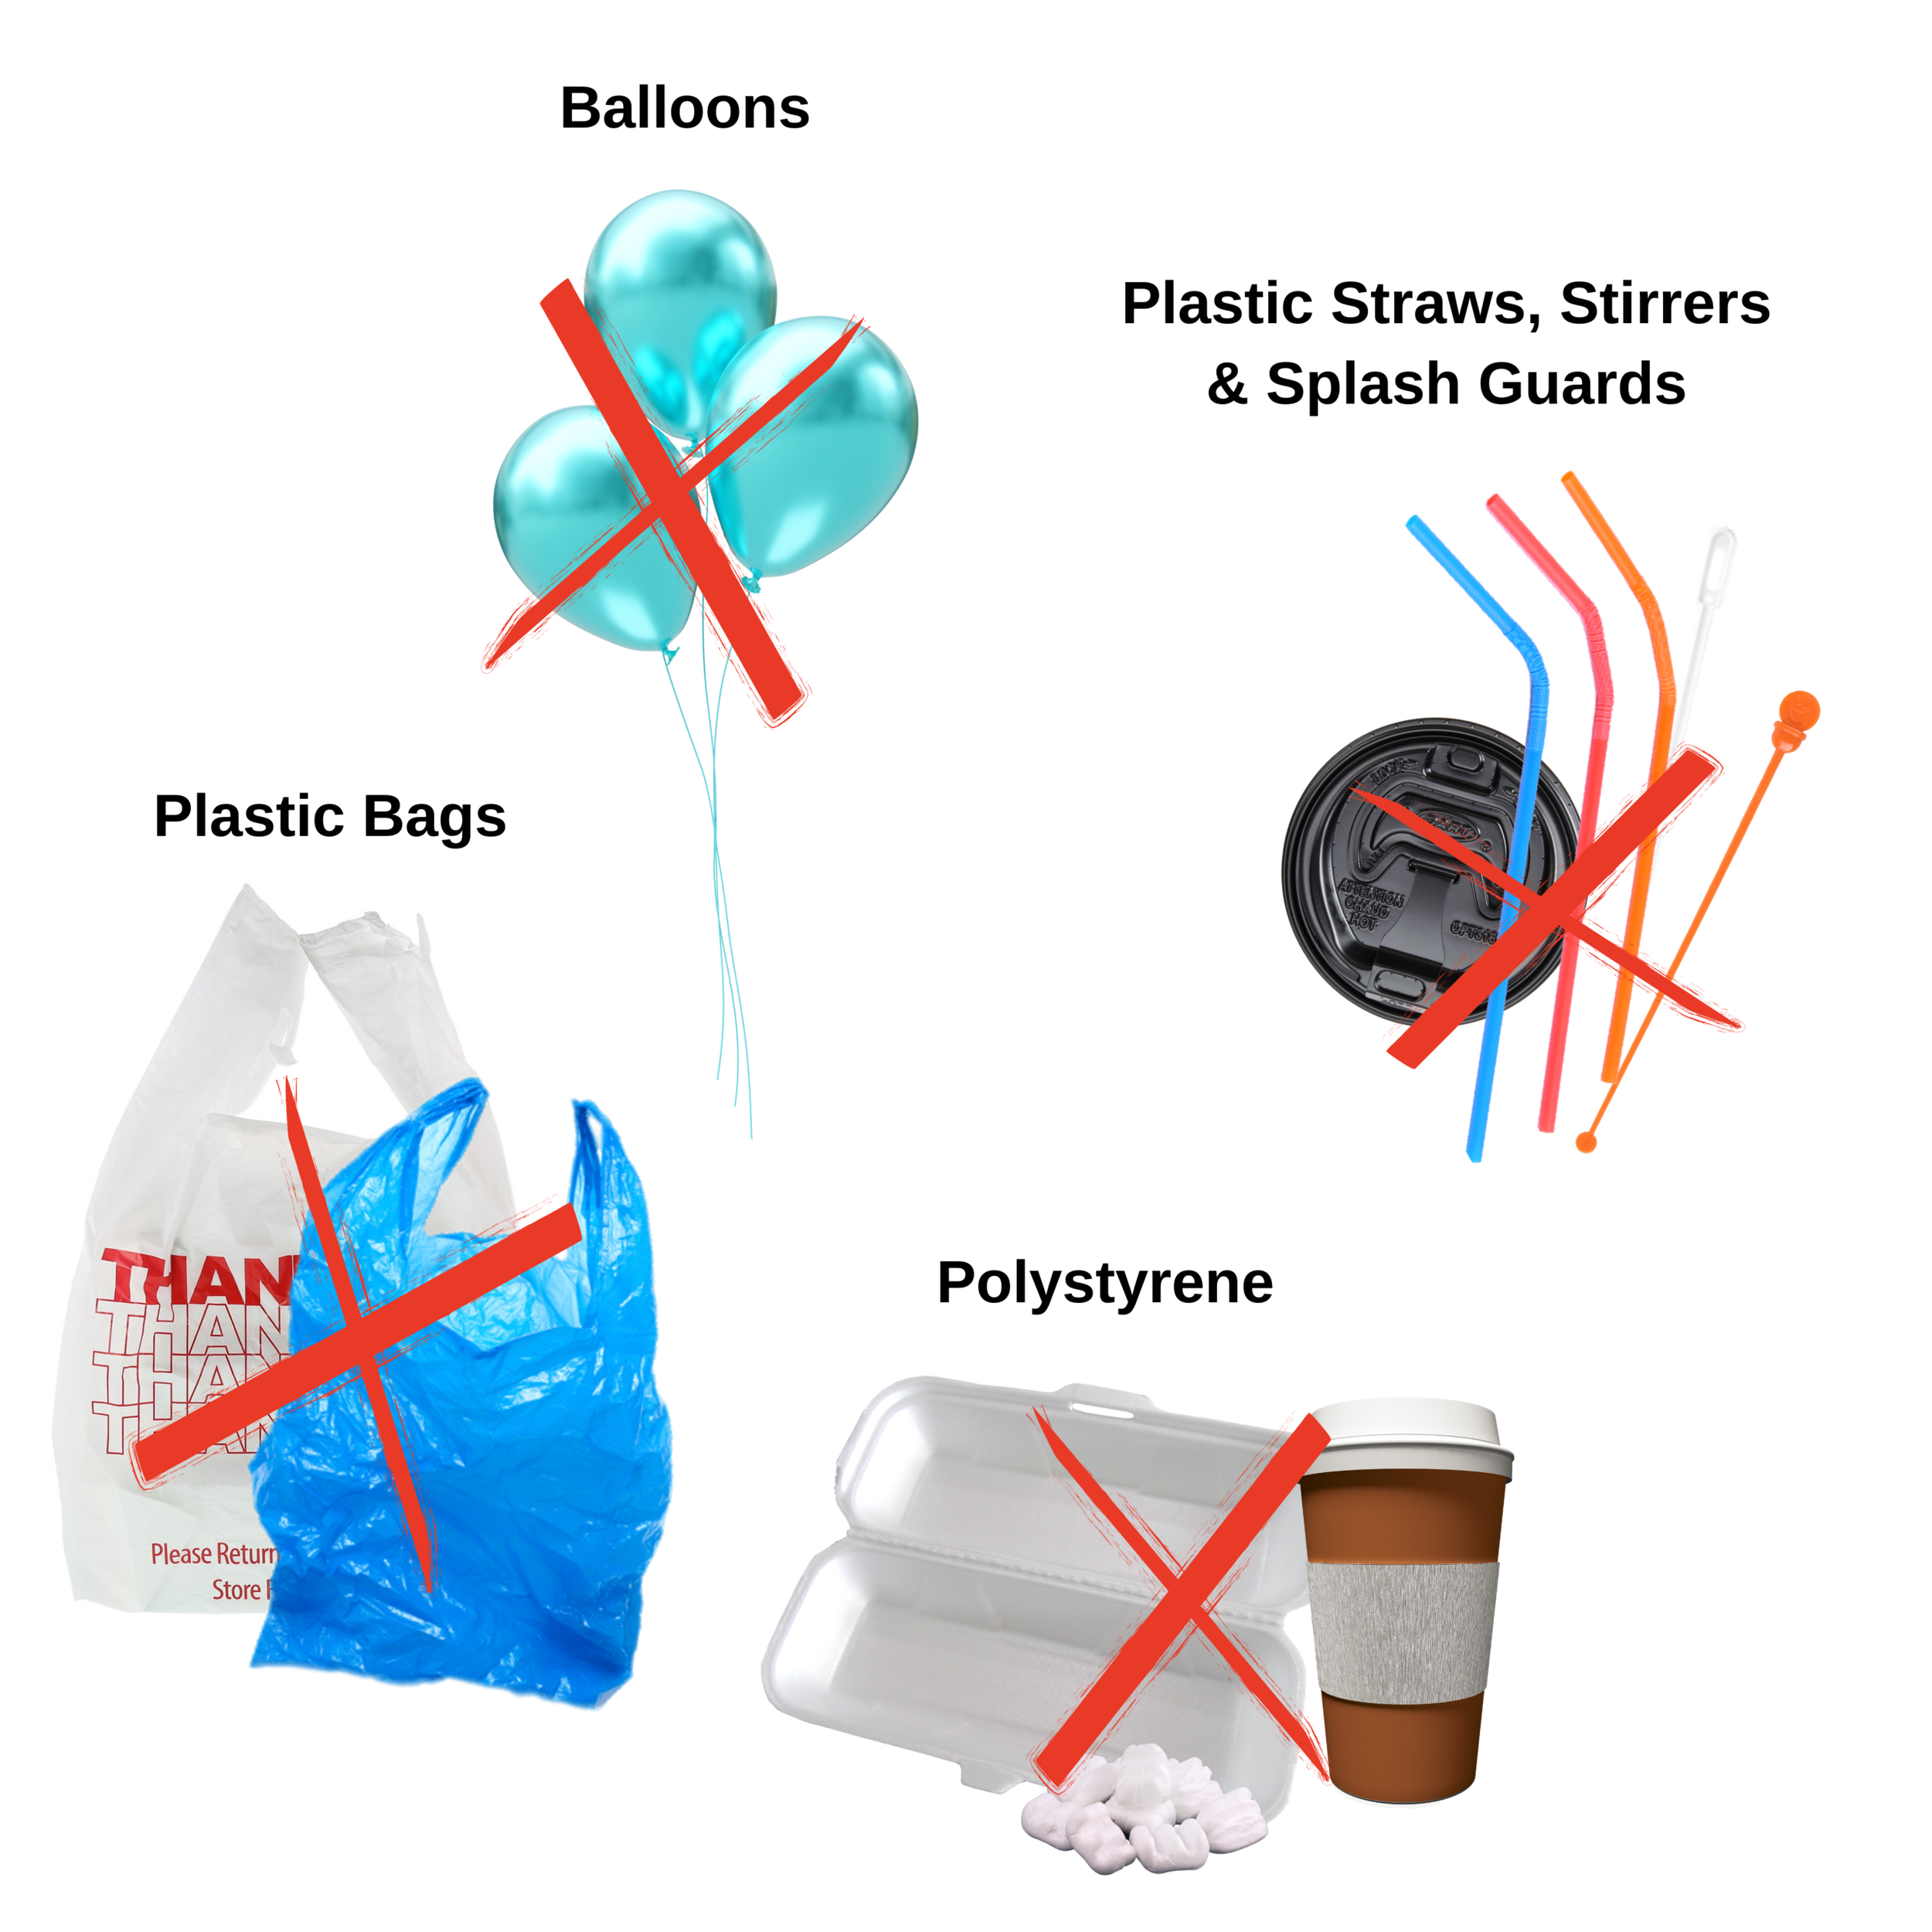 Pass a Skip the Stuff Policy — Beyond Plastics - Working To End Single-Use  Plastic Pollution